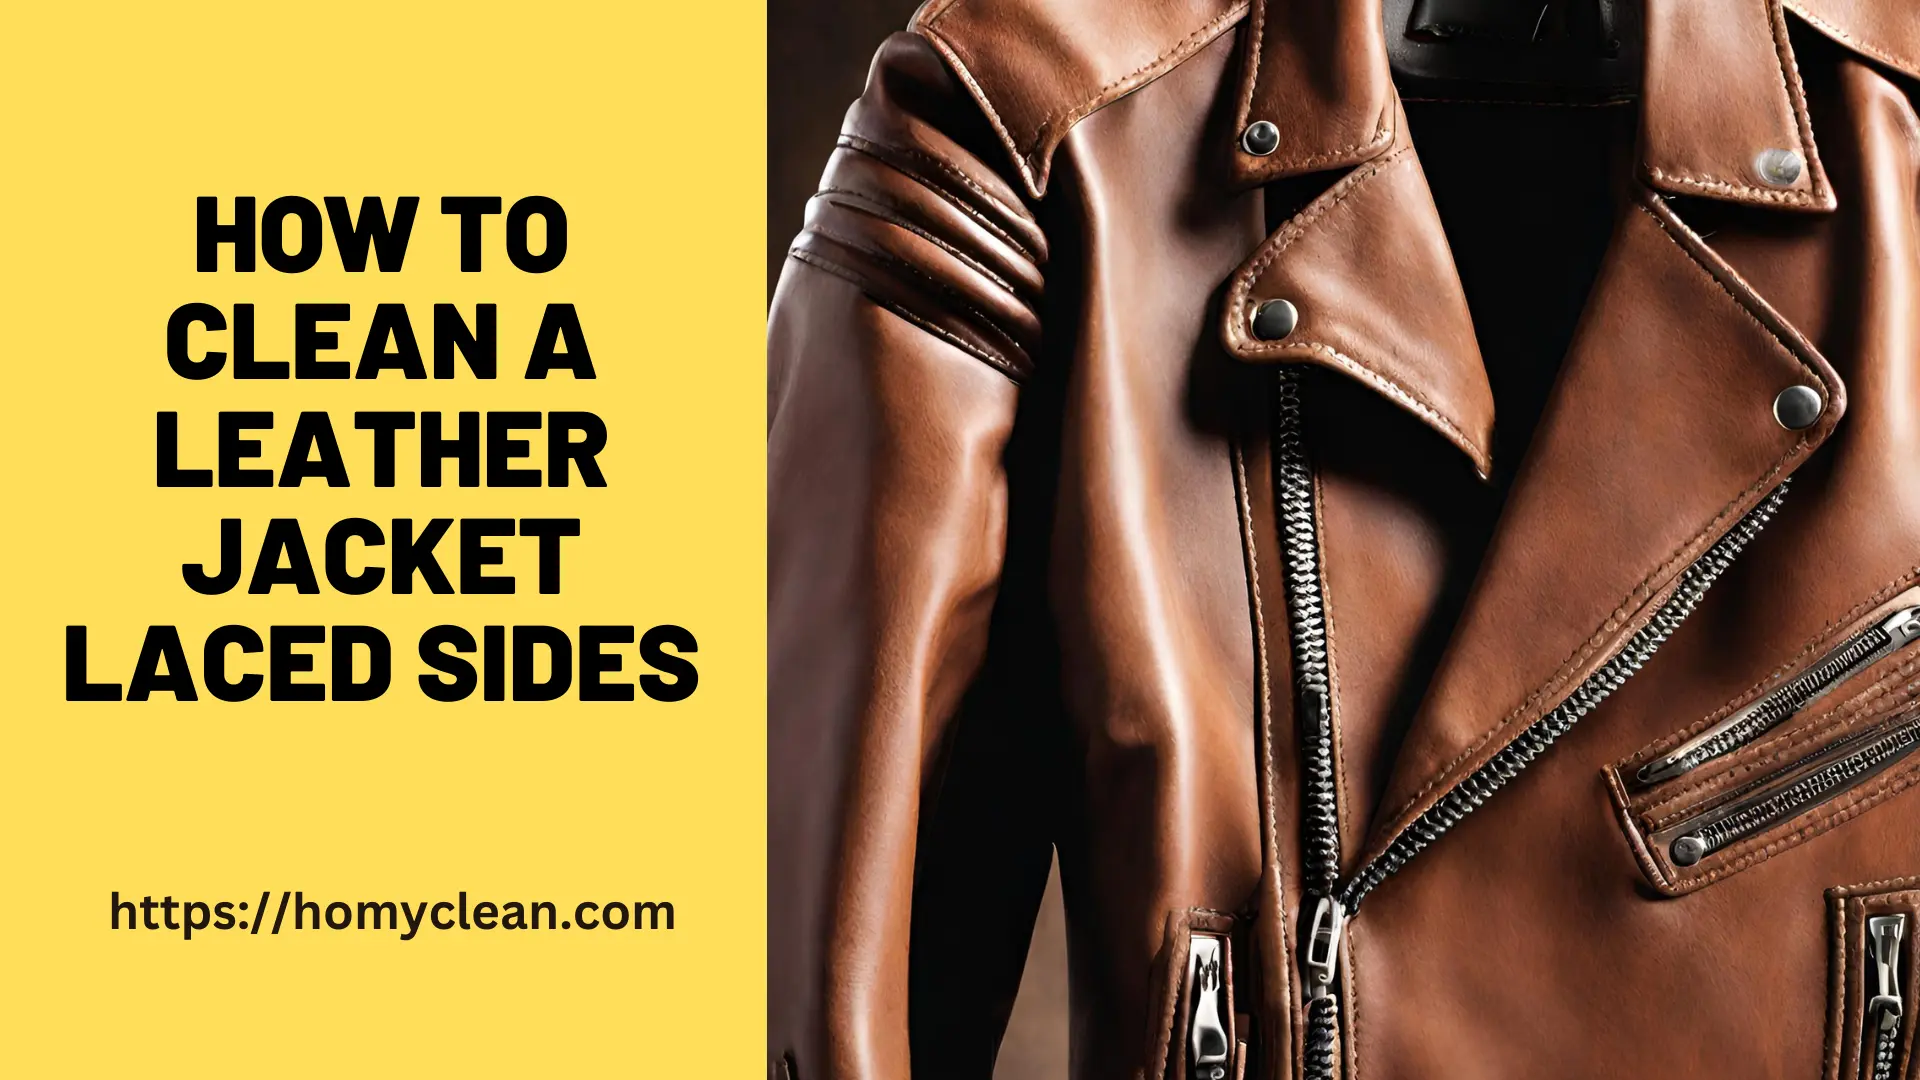 How to Clean a Leather Jacket Laced Sides